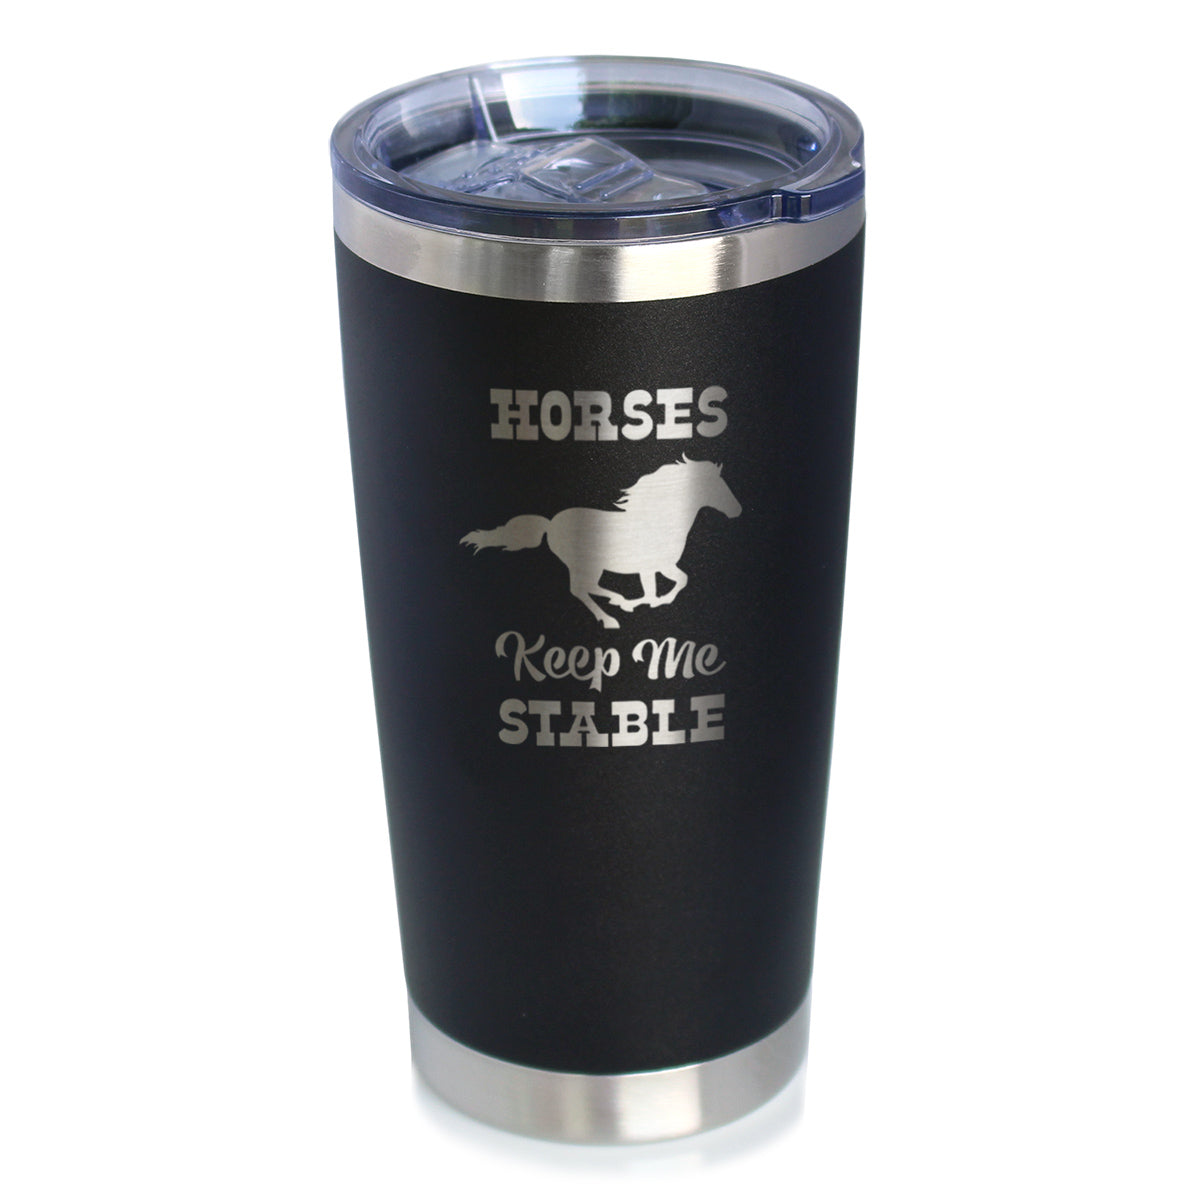 Horses Keep Me Stable - Insulated Coffee Tumbler Cup with Sliding Lid - Stainless Steel Insulated Mug - Horse Themed Coffee Gifts